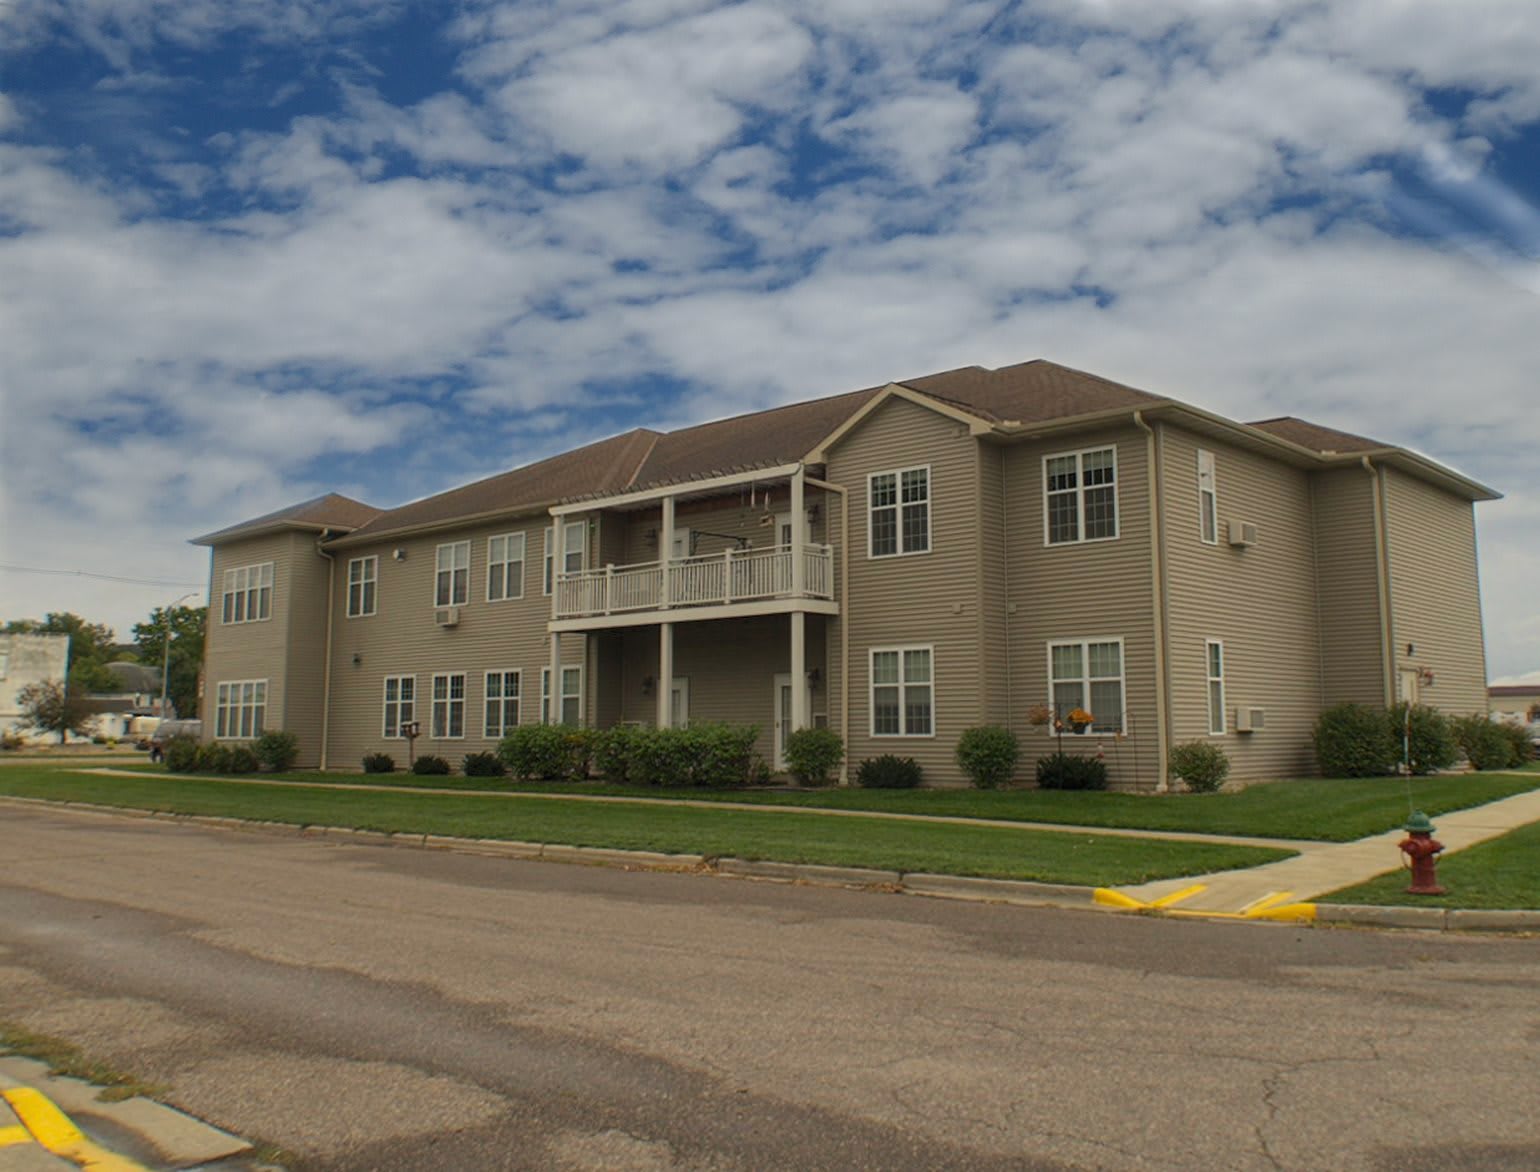 Photo of Our House Senior Living Assisted Care and Memory Care - Richland Center